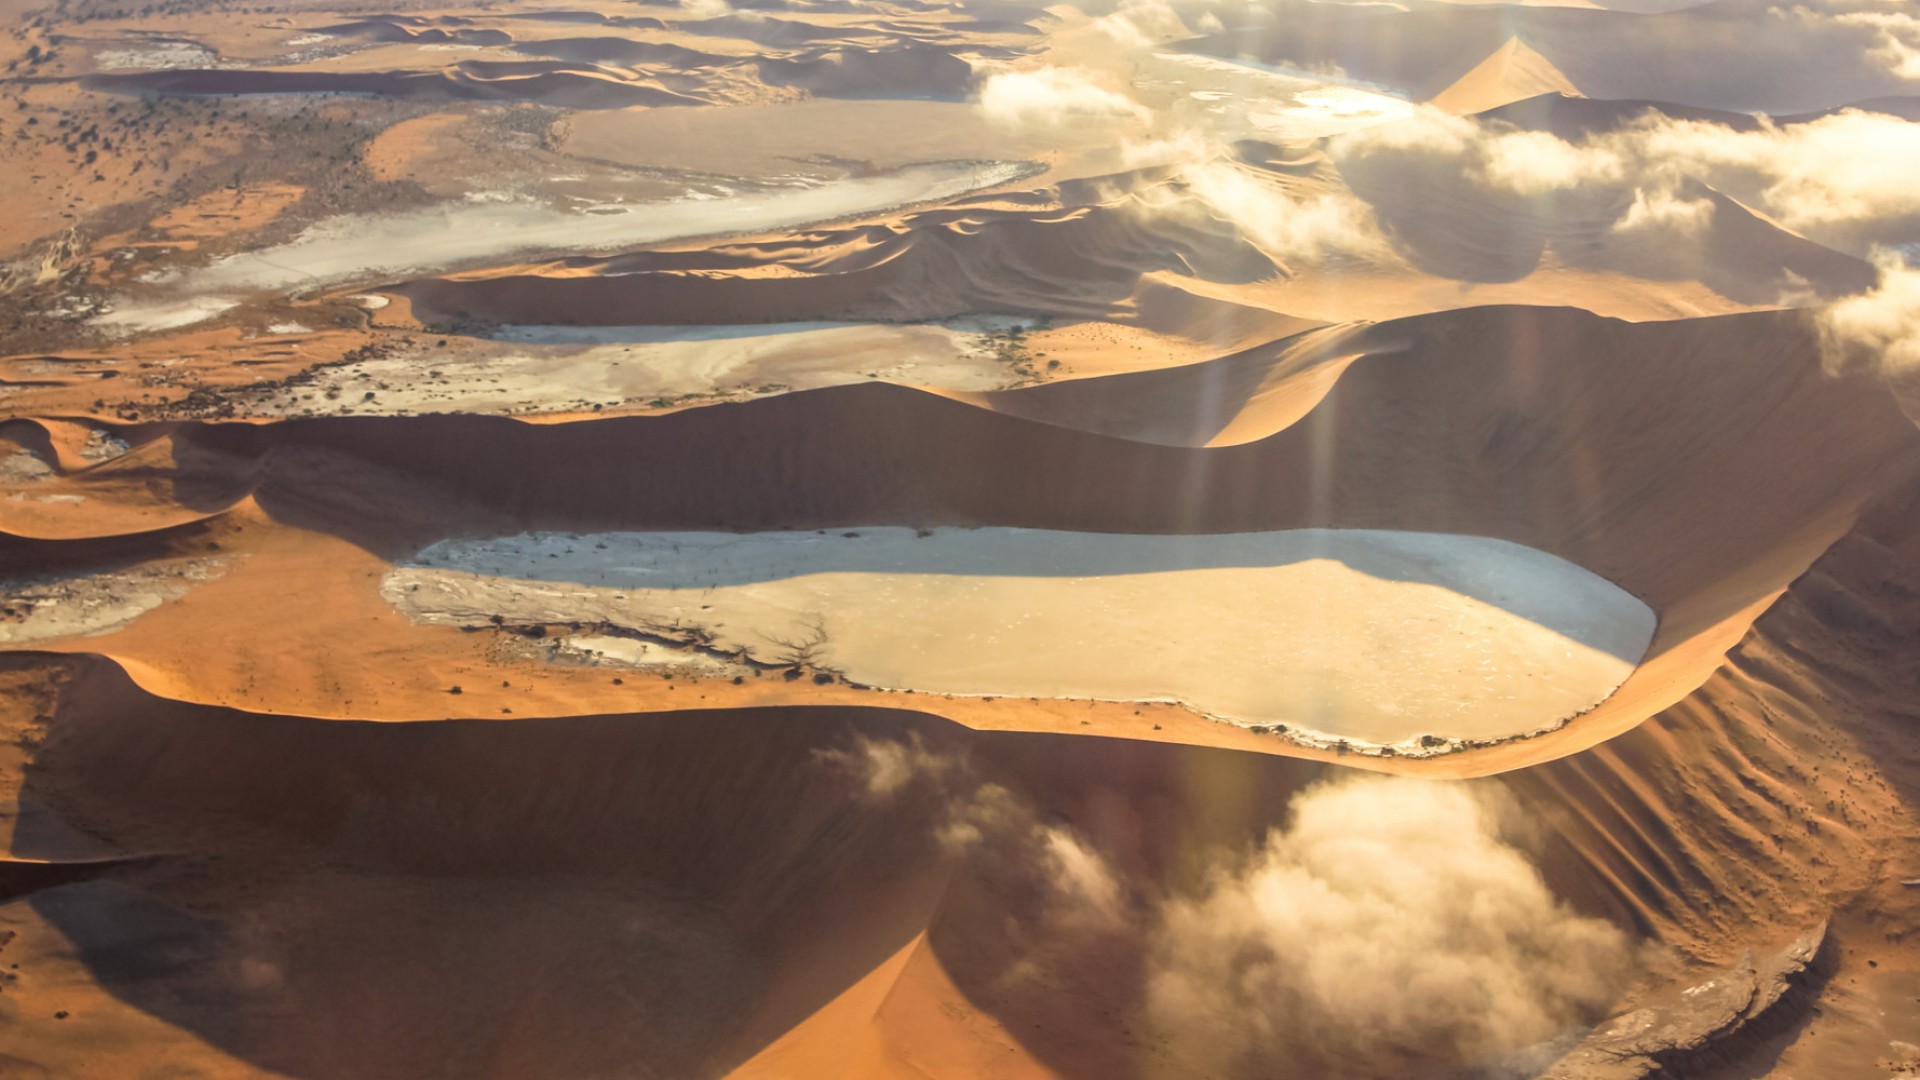 Birds eye view of sand dunes and desert basins in Namib Naukluft National Park in Namibia